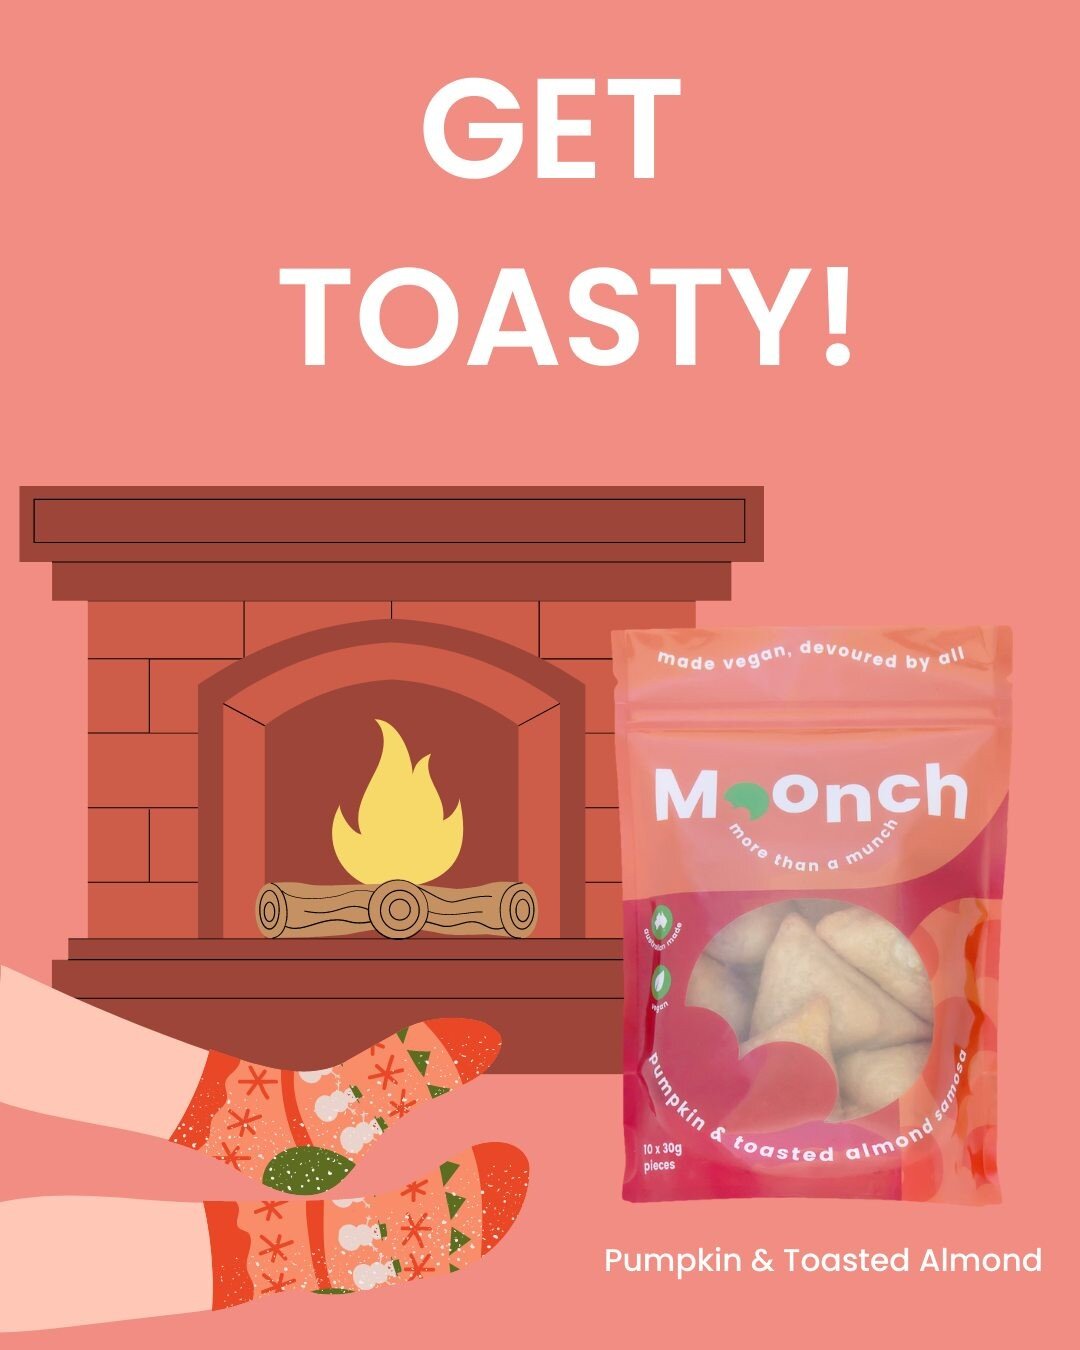 Feel like getting toasty tonight? Our Pumpkin &amp; Toasted Almost Samosa is the perfect winter snack to Moonch on!
-
-
-
#veganfood
#vegetarian
#vegan
#govegan
#realfood
#veganlife
#happyfood